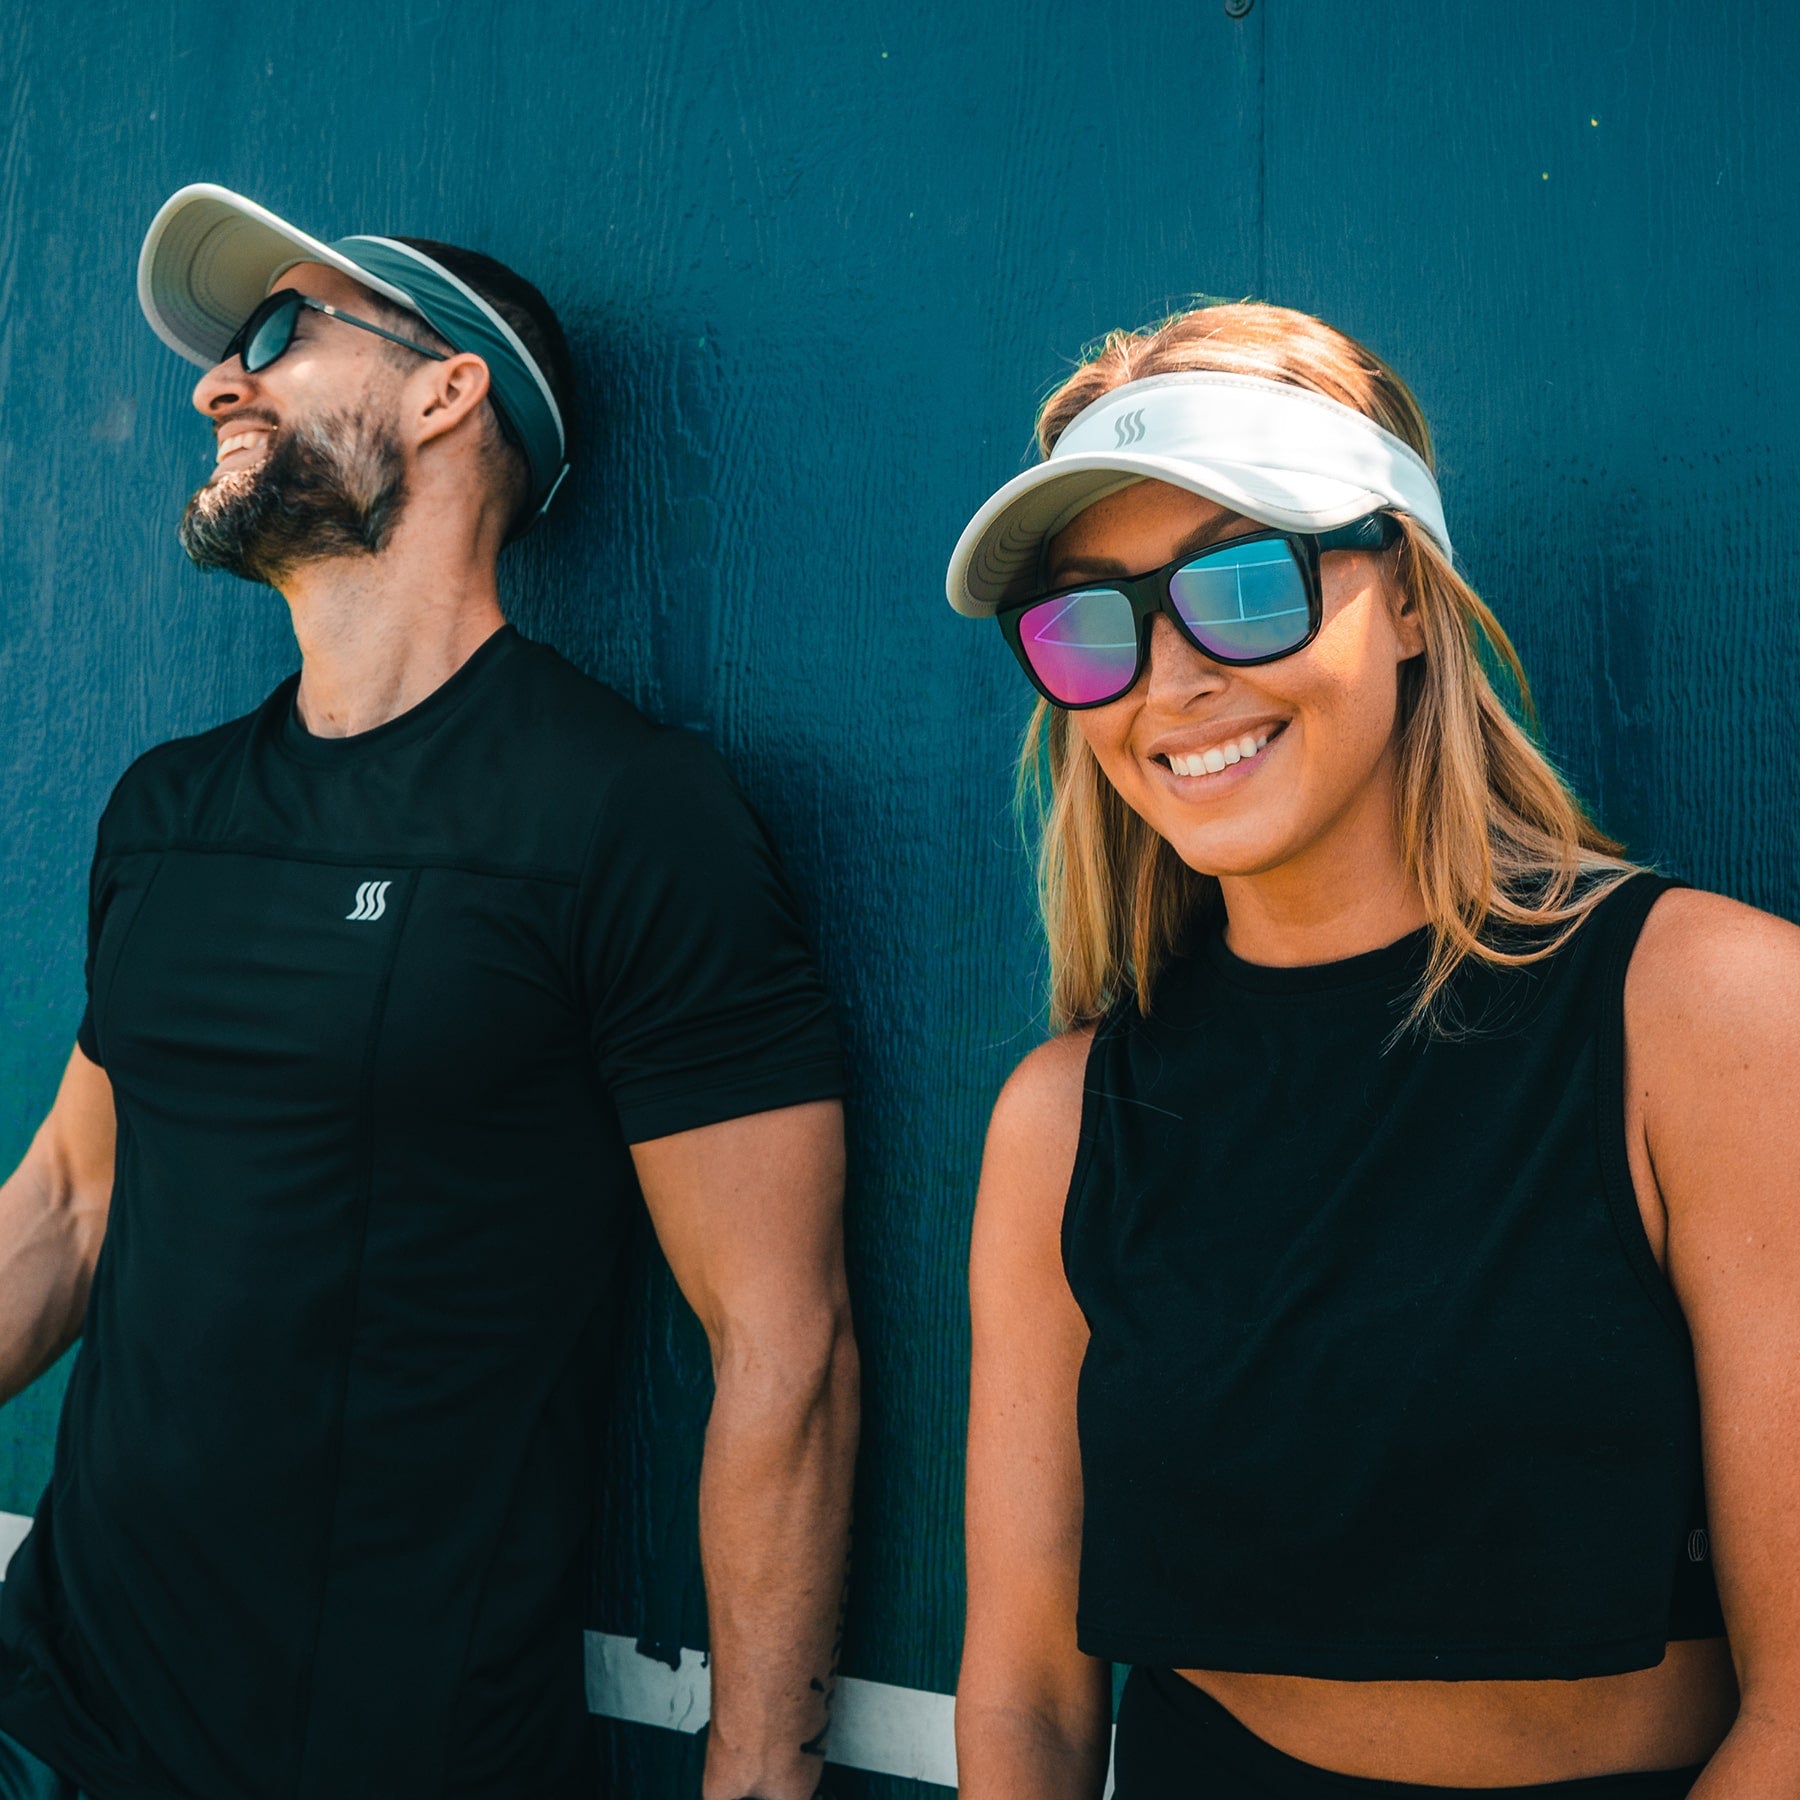 Women and man enjoying their sport visors while playing tennis & running. This visor offers sun protection and is soft and lightweight so it is always comfortable.